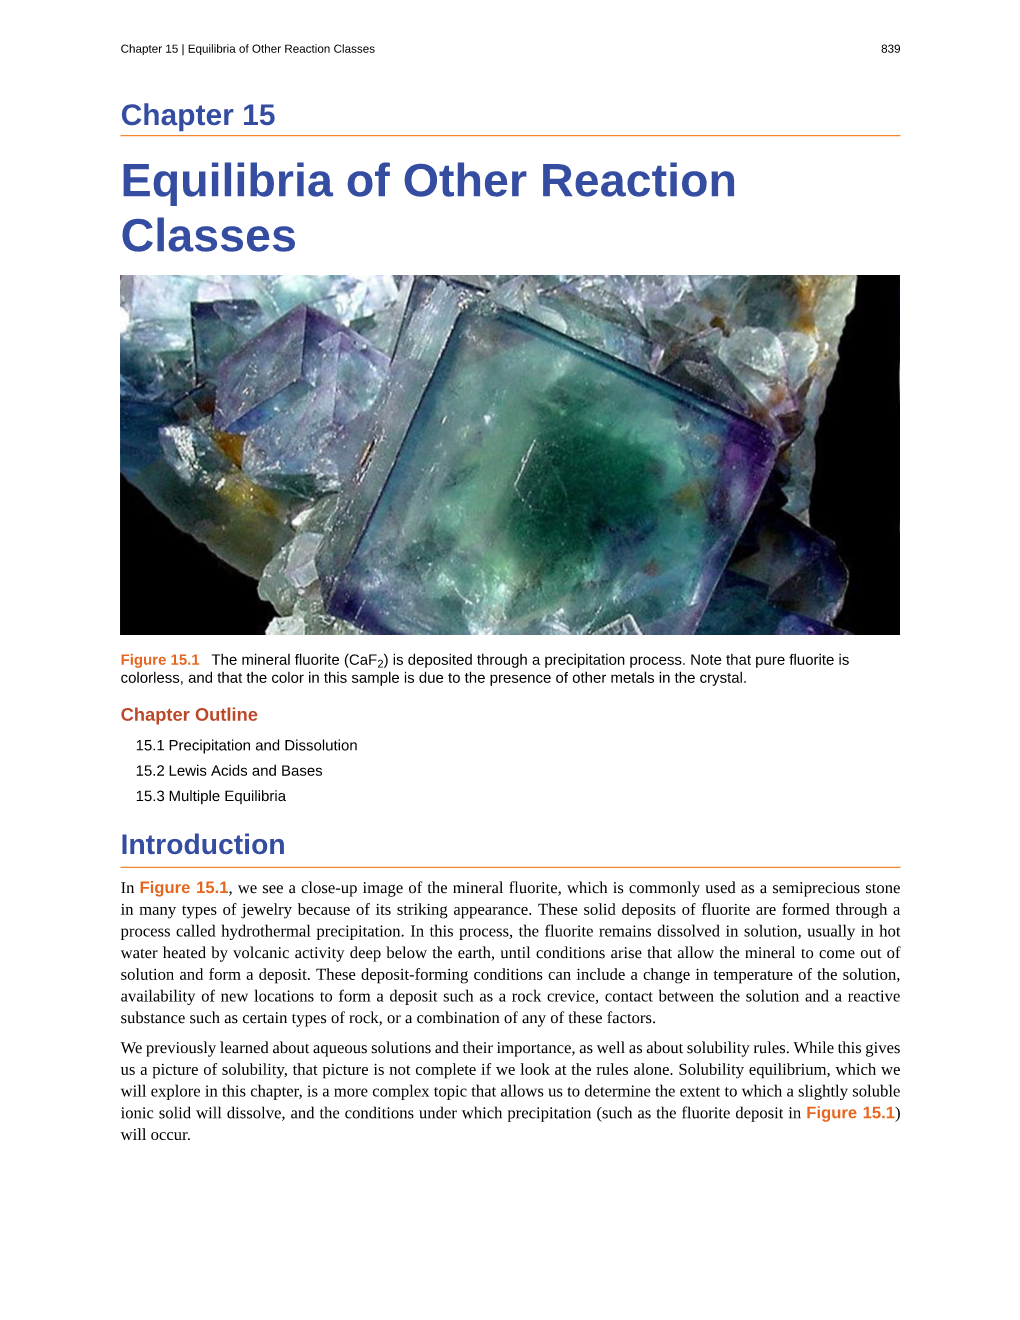 Equilibria of Other Reaction Classes 839